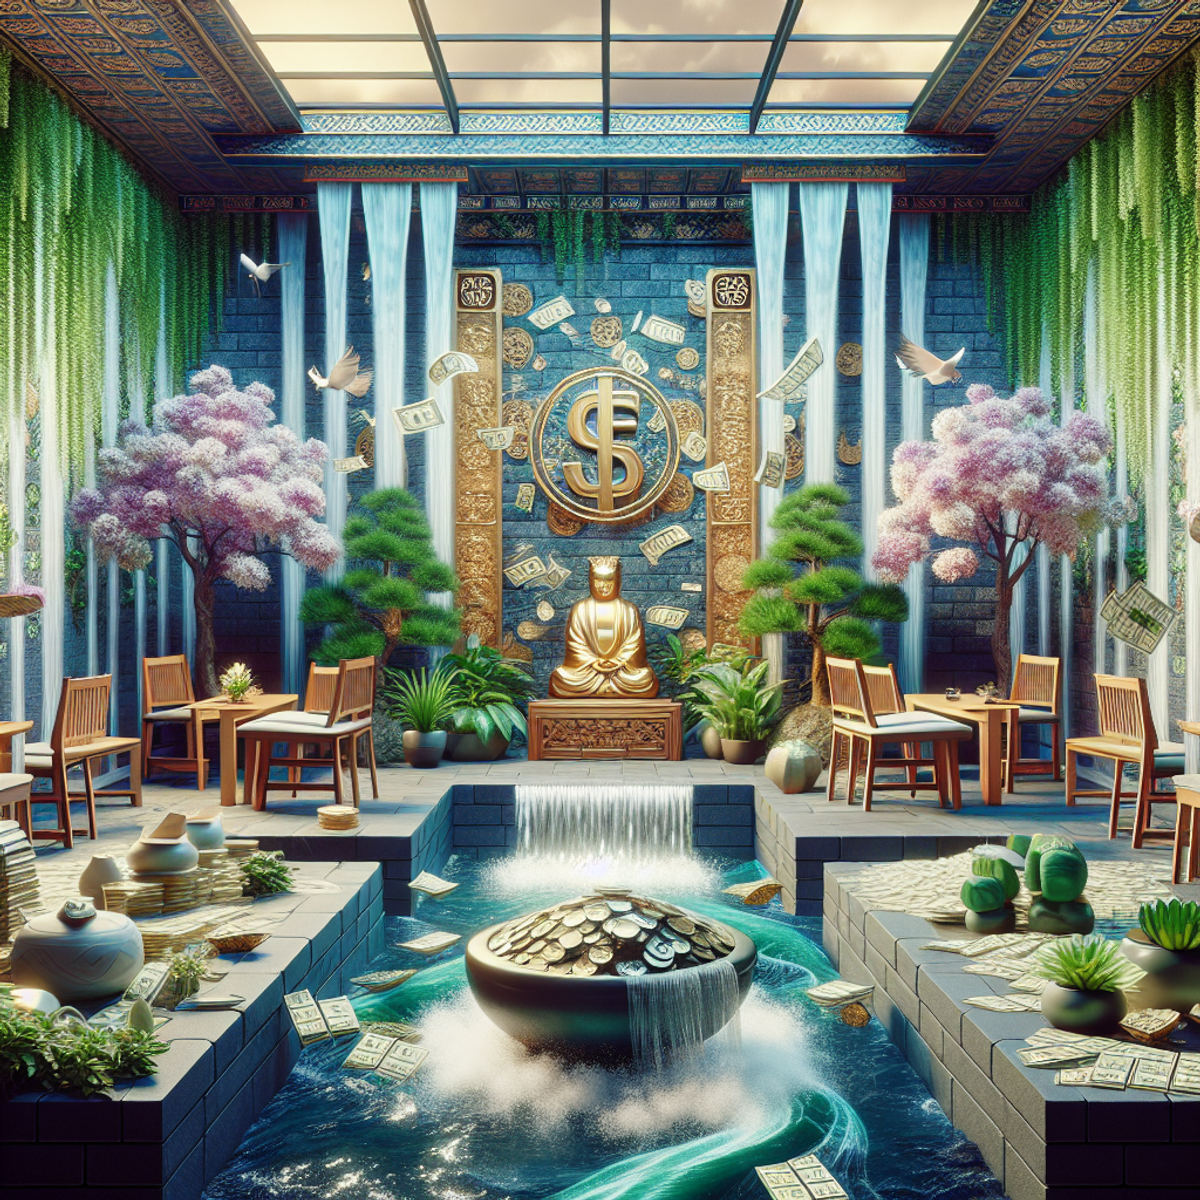 You can optimize your home and office spaces for financial abundance through Feng Shui by enhancing prosperity energy at the front entrance area, activating the wealth corner in different rooms of the house, and using water features to stimulate money flow at home.